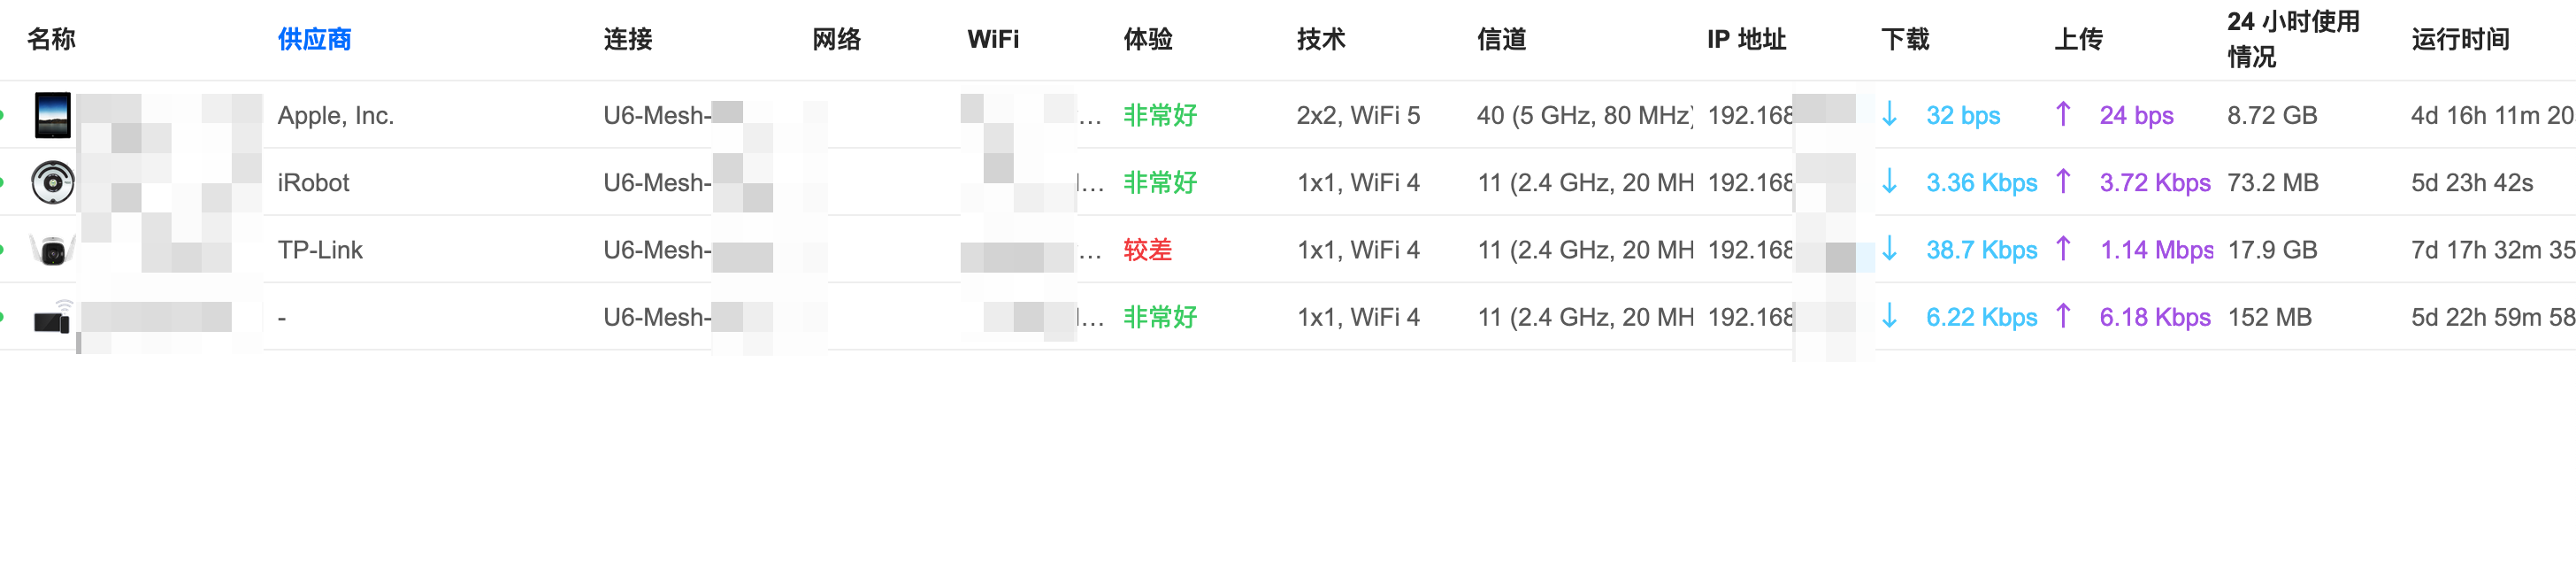 /styles/images/wifi_upgrade/unifi_web10.png